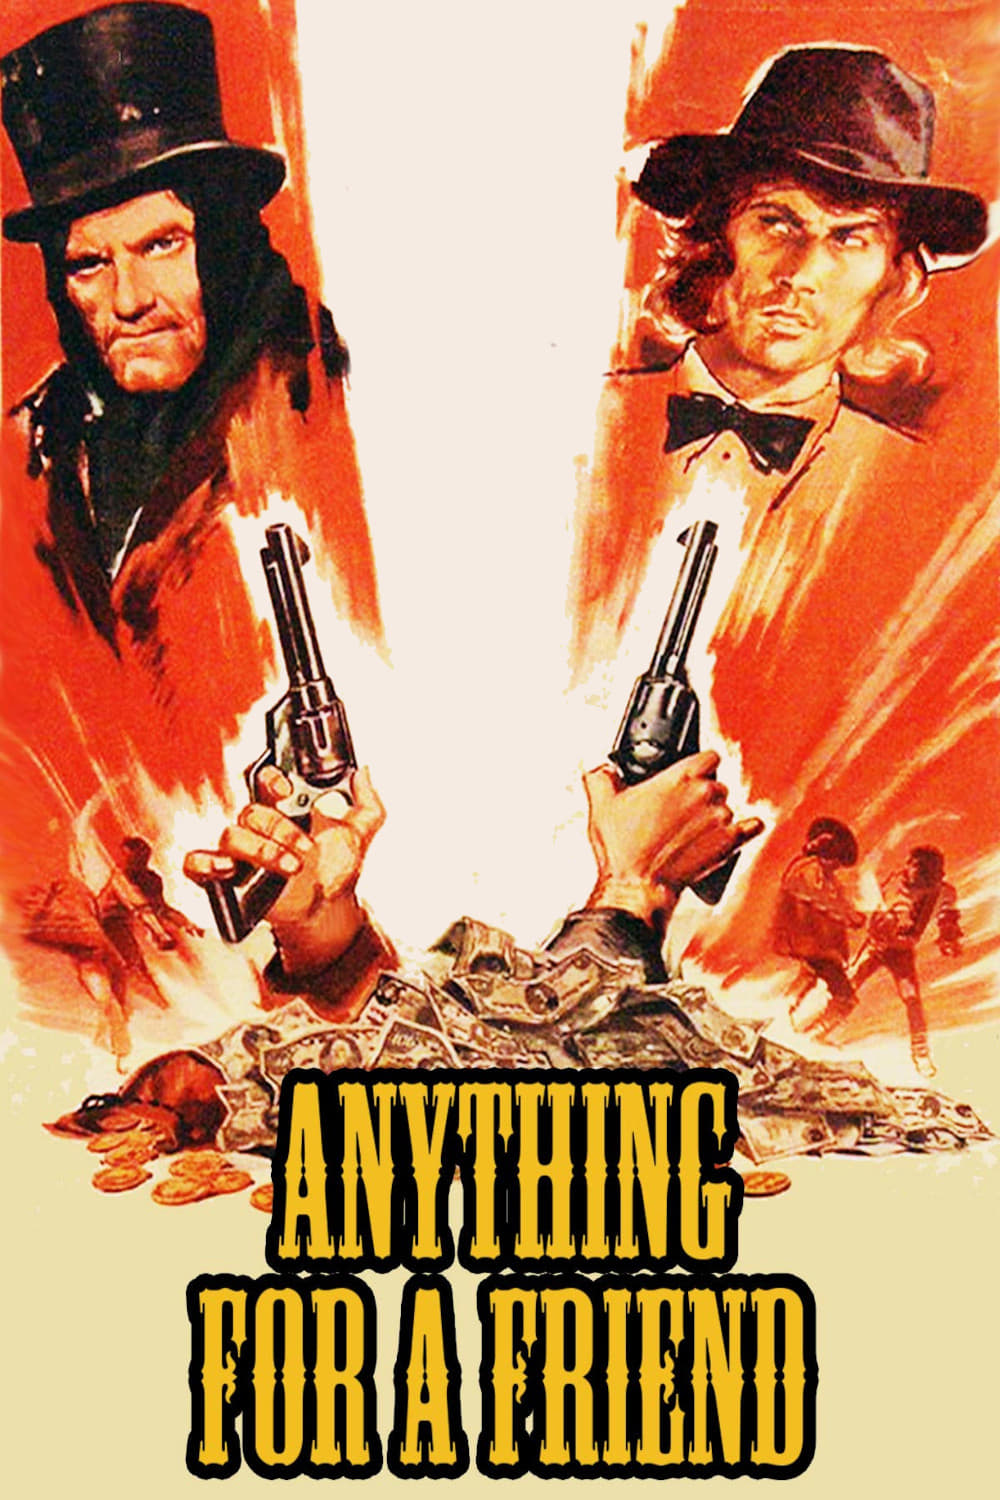 Anything for a Friend (1973)